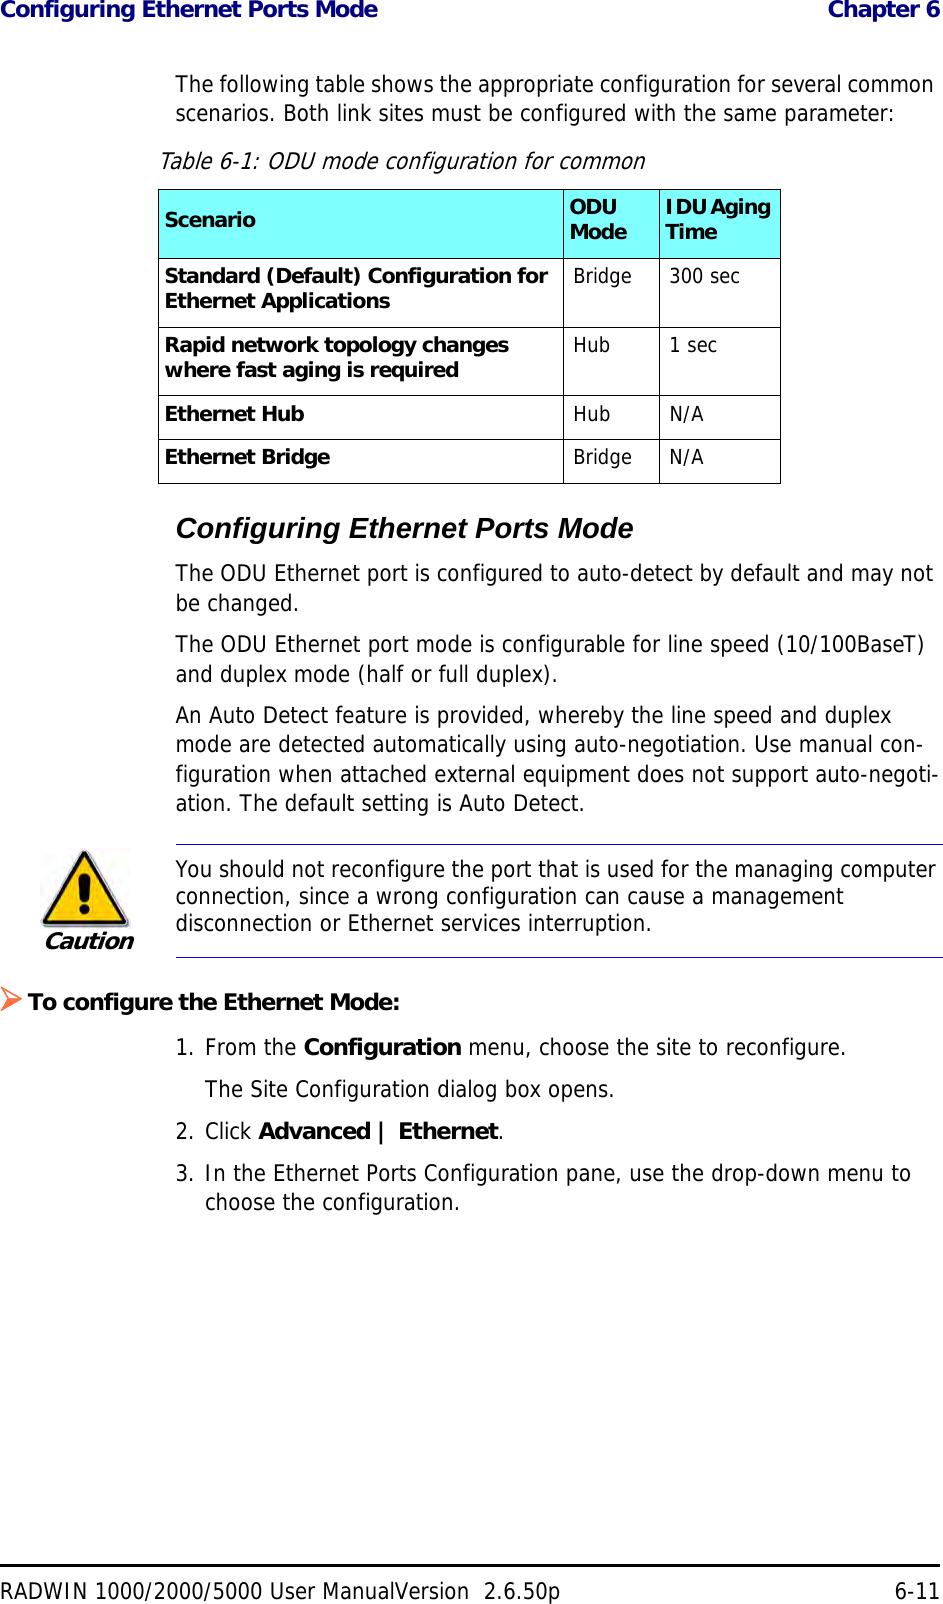 Configuring Ethernet Ports Mode  Chapter 6RADWIN 1000/2000/5000 User ManualVersion  2.6.50p 6-11The following table shows the appropriate configuration for several common scenarios. Both link sites must be configured with the same parameter:Configuring Ethernet Ports ModeThe ODU Ethernet port is configured to auto-detect by default and may not be changed.The ODU Ethernet port mode is configurable for line speed (10/100BaseT) and duplex mode (half or full duplex).An Auto Detect feature is provided, whereby the line speed and duplex mode are detected automatically using auto-negotiation. Use manual con-figuration when attached external equipment does not support auto-negoti-ation. The default setting is Auto Detect.To configure the Ethernet Mode:1. From the Configuration menu, choose the site to reconfigure.The Site Configuration dialog box opens.2. Click Advanced | Ethernet.3. In the Ethernet Ports Configuration pane, use the drop-down menu to choose the configuration.Table 6-1: ODU mode configuration for commonScenario ODU Mode IDU Aging TimeStandard (Default) Configuration for Ethernet Applications Bridge 300 secRapid network topology changes where fast aging is required Hub 1 secEthernet Hub Hub N/AEthernet Bridge Bridge N/ACautionYou should not reconfigure the port that is used for the managing computer connection, since a wrong configuration can cause a management disconnection or Ethernet services interruption.